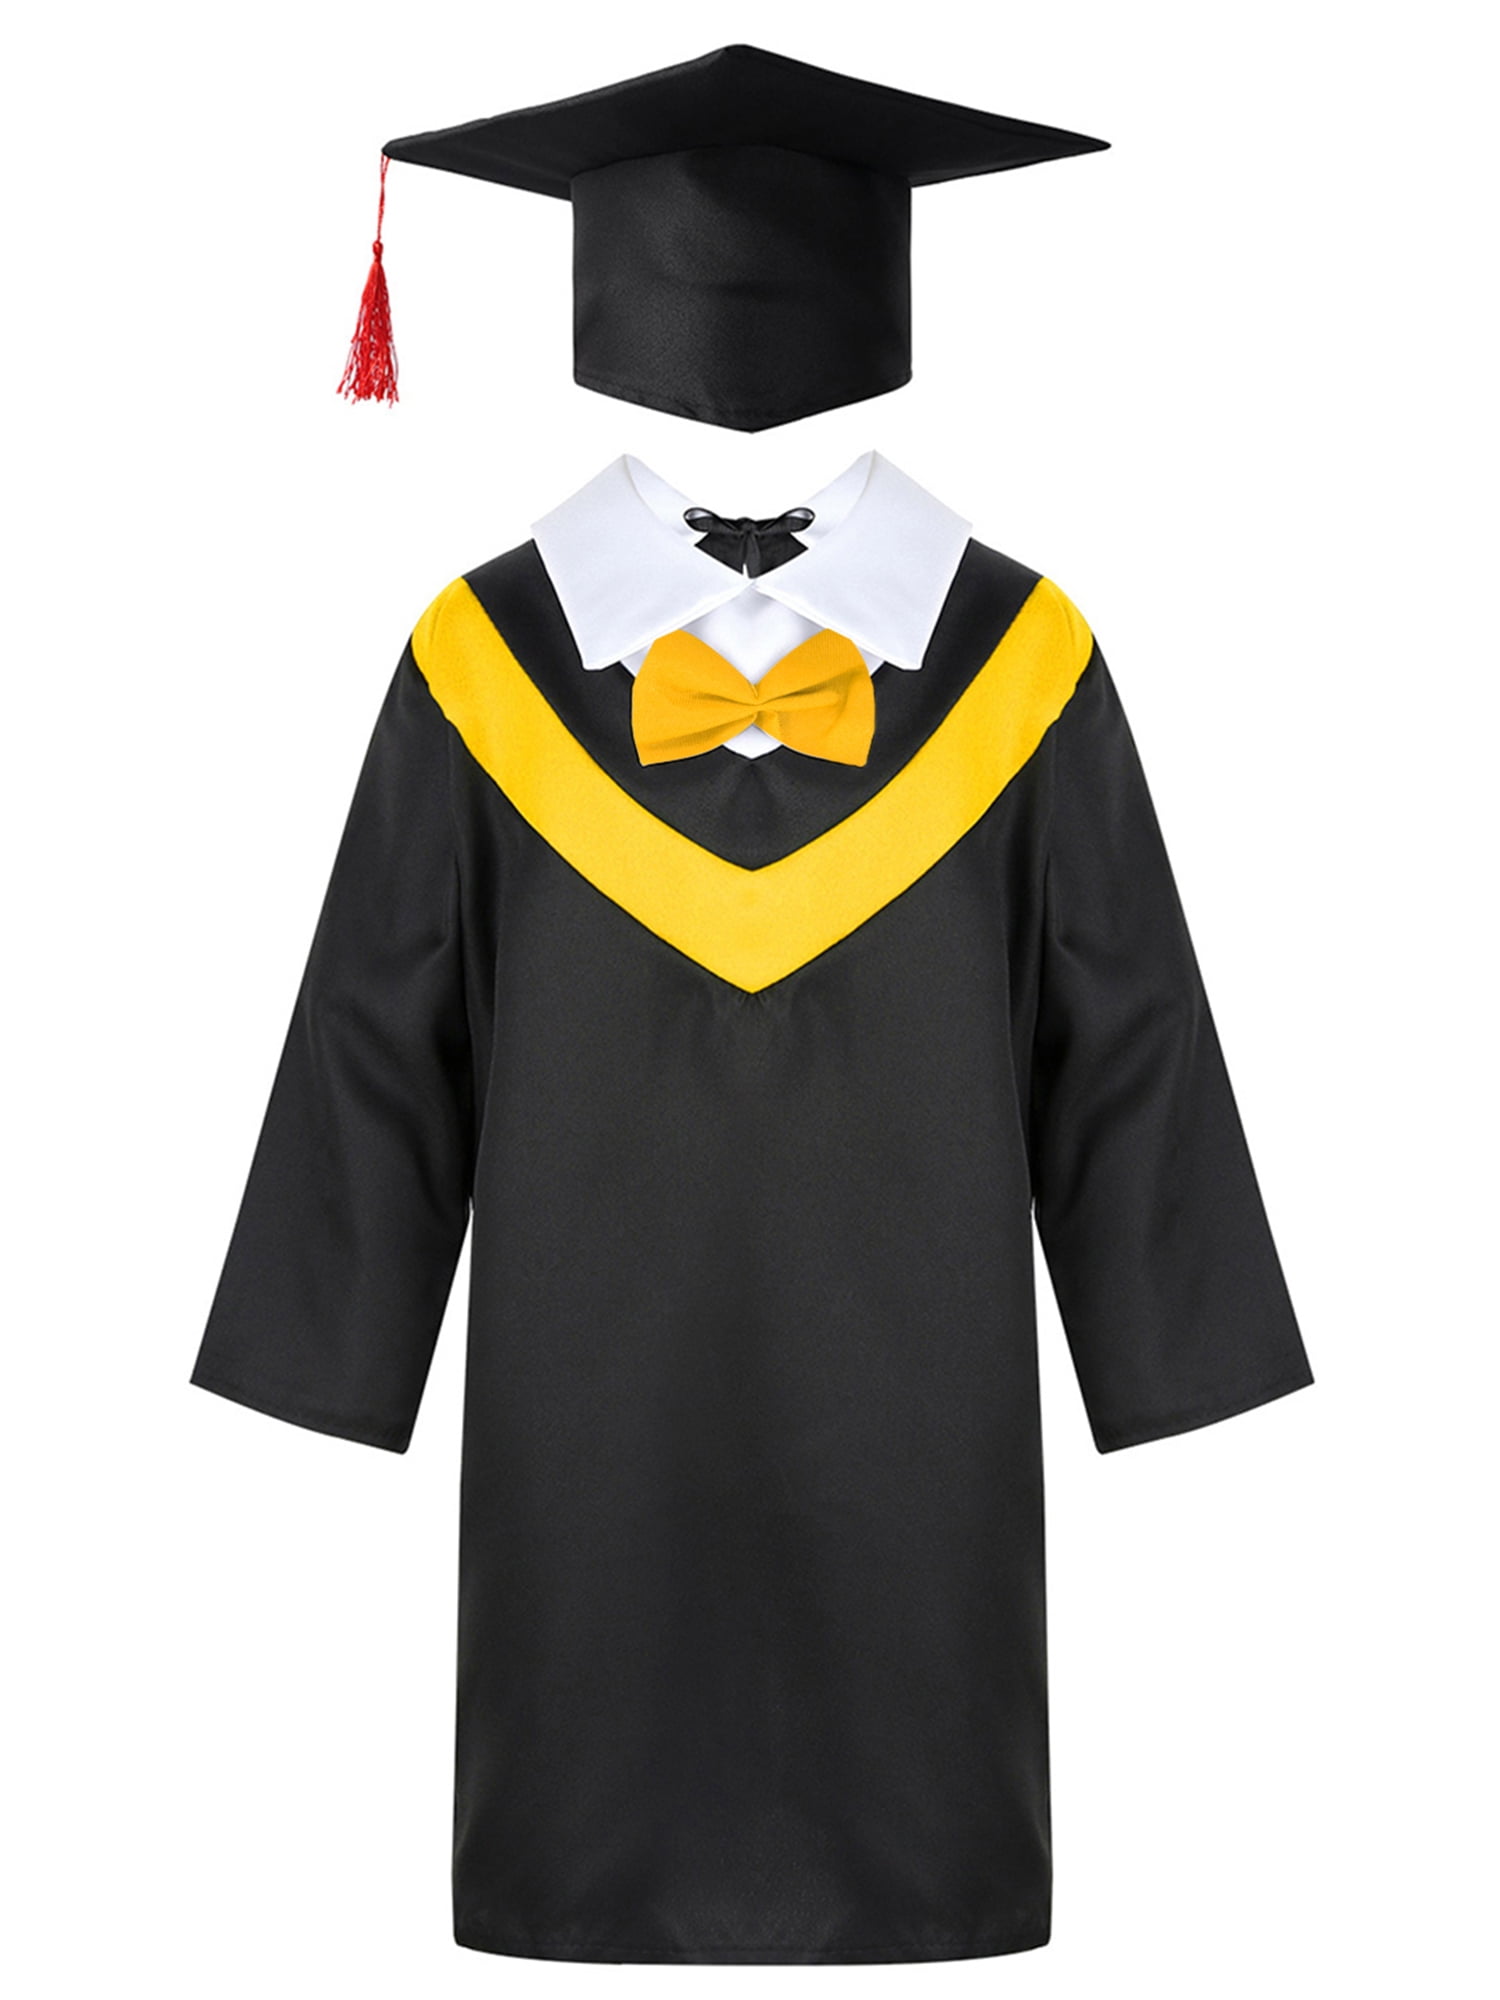 A man in a graduation gown standing in the grass photo – Free Citam karen  (christ is the answer ministries - karen) Image on Unsplash